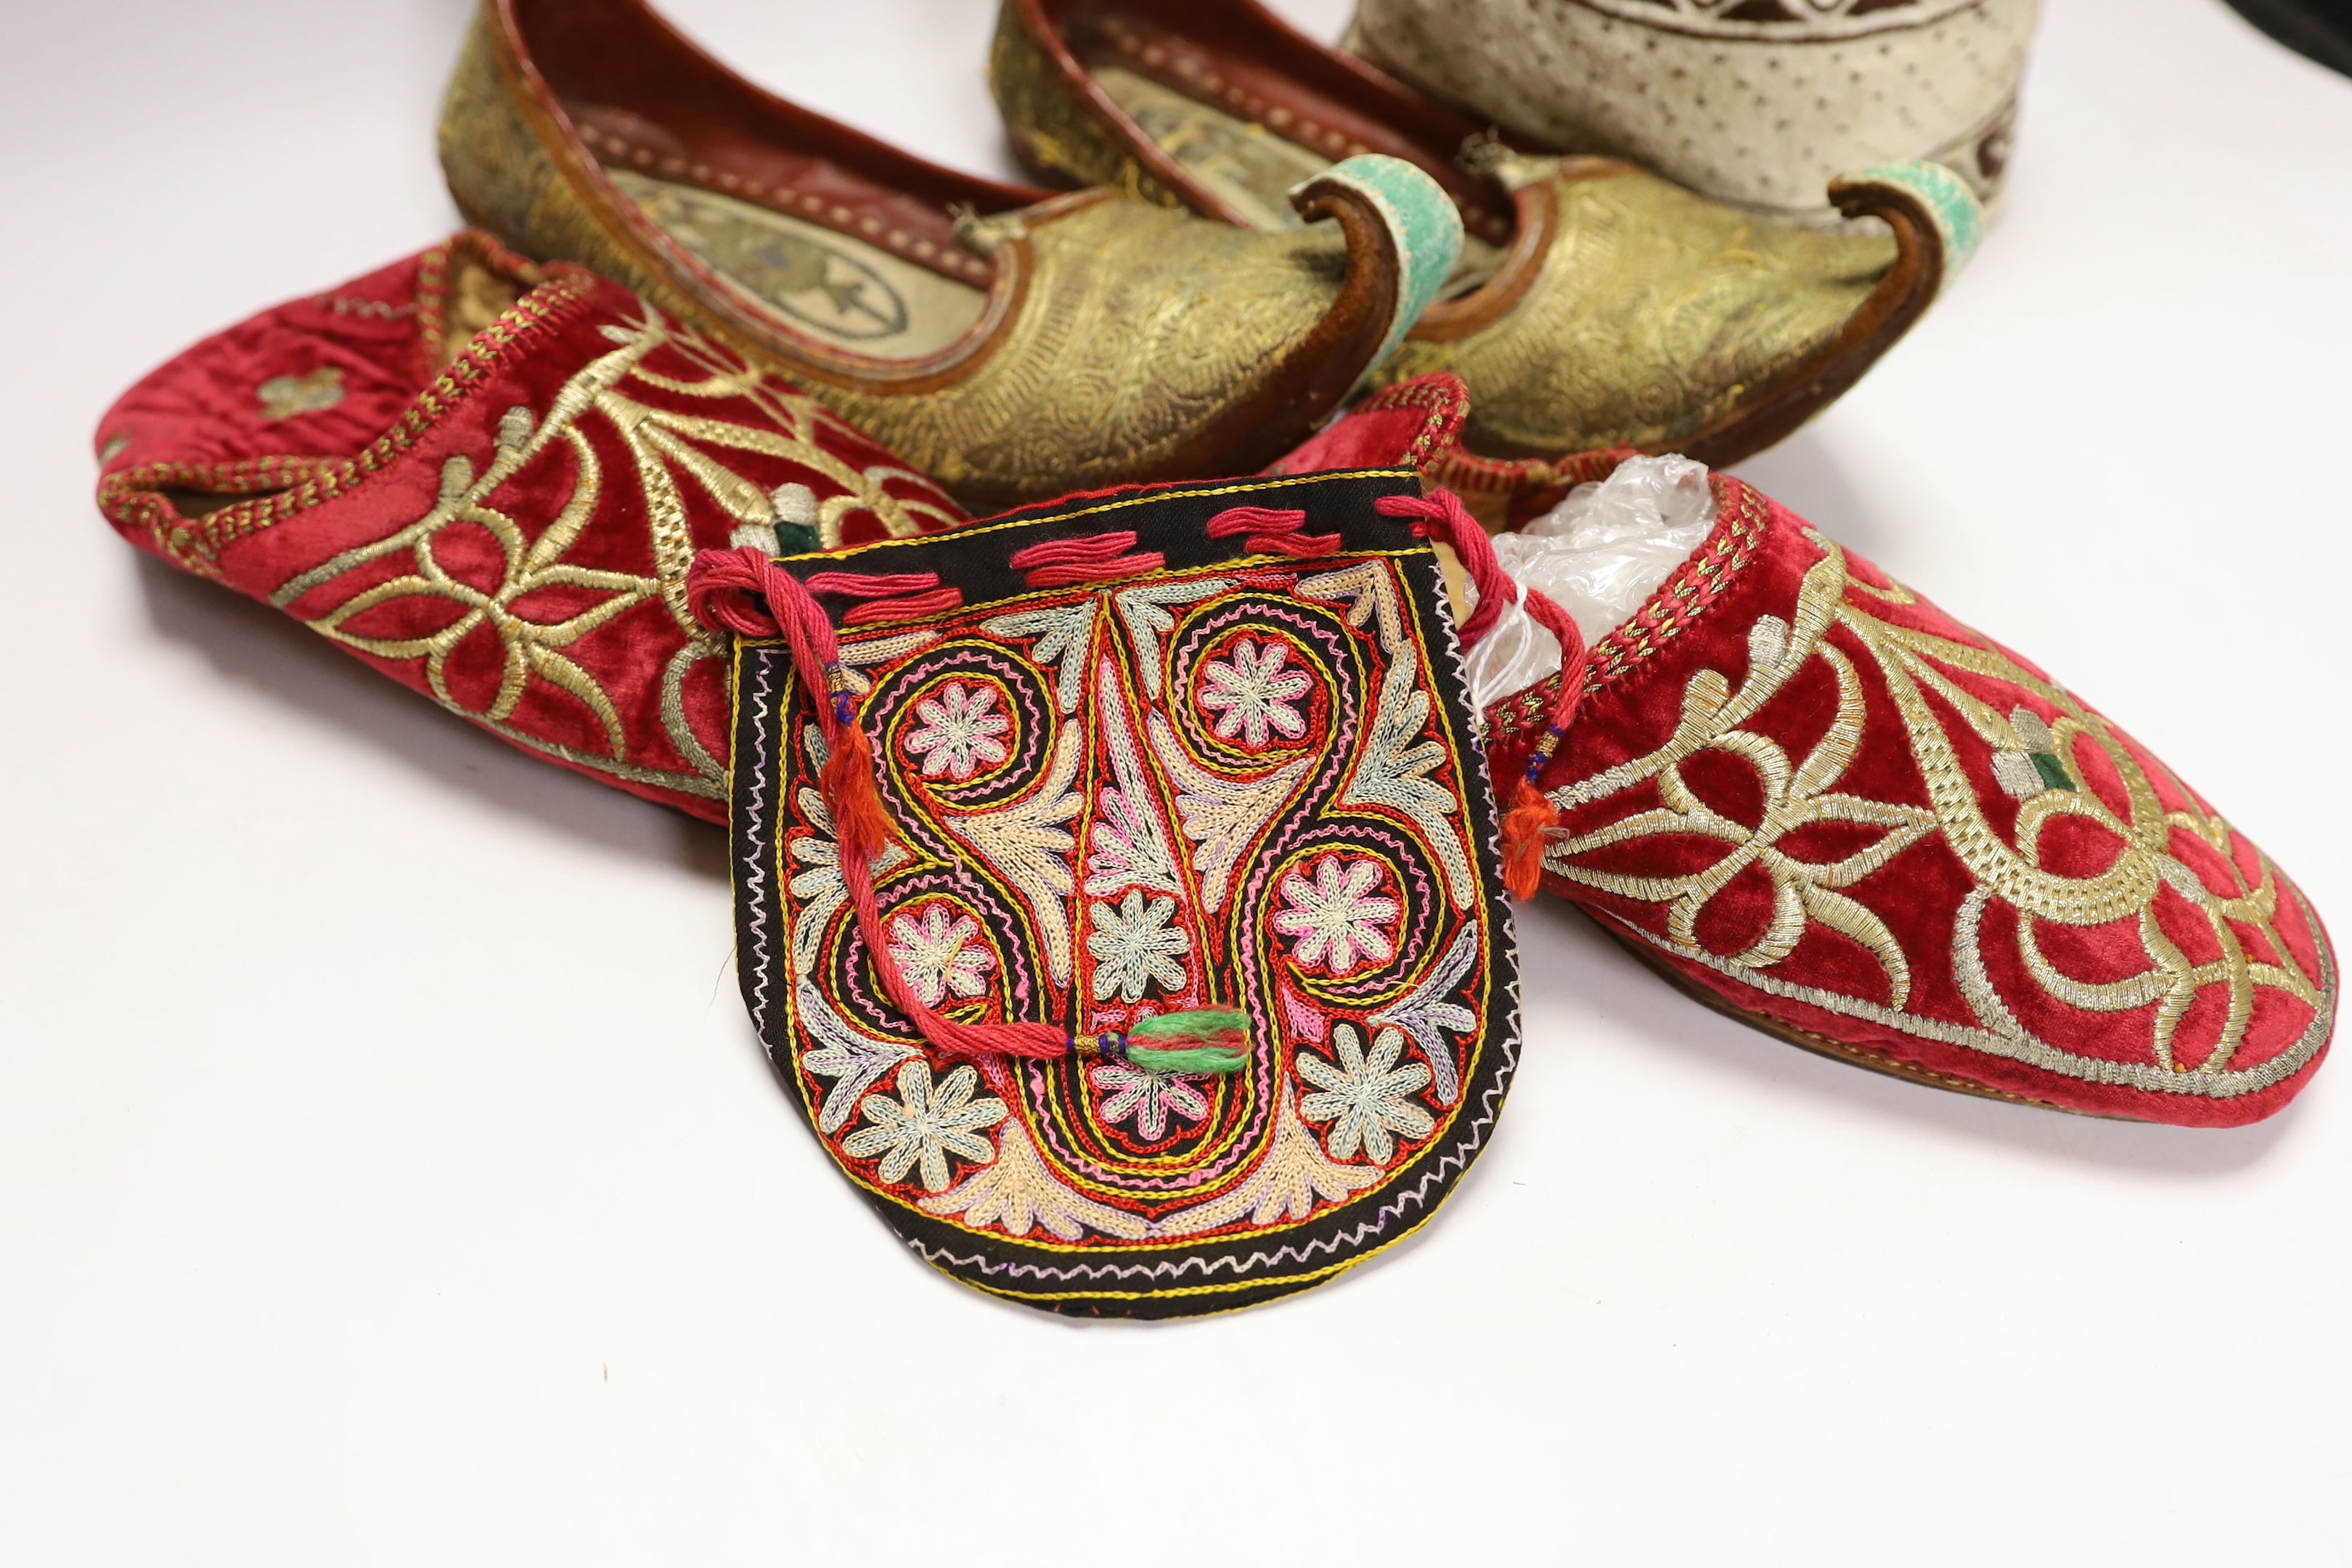 A pair of early 20th century metal thread embroidered Turkish slippers, a pair of similar embroidered red velvet children’s Indian slippers, an embroidered chain stitch drawstring purse and a quilted child’s hat